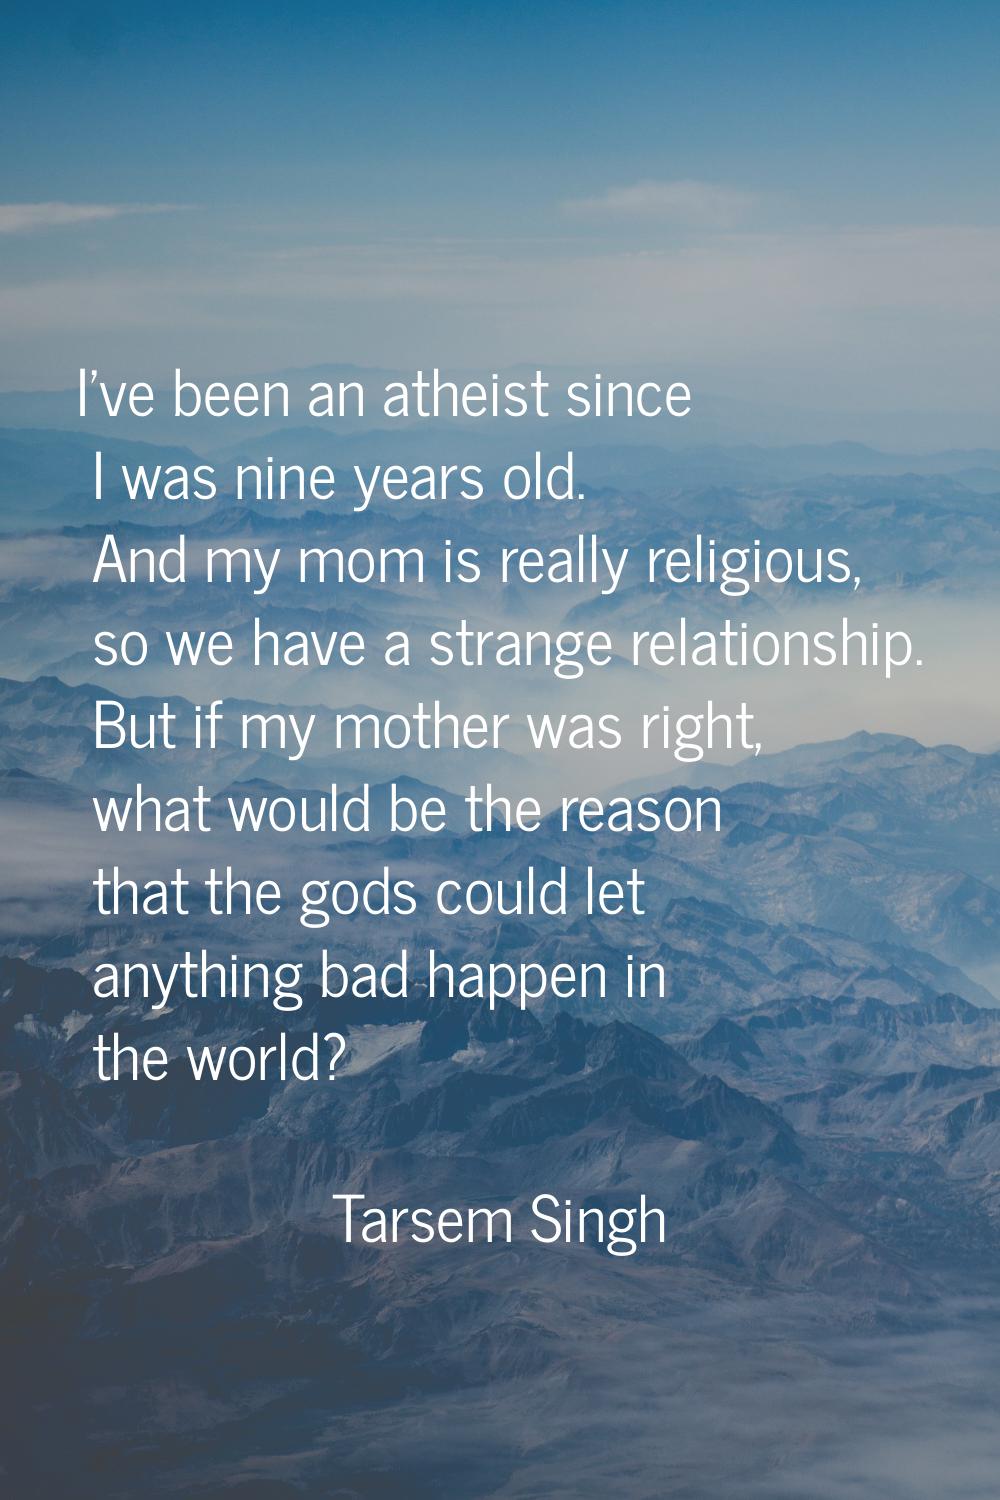 I've been an atheist since I was nine years old. And my mom is really religious, so we have a stran